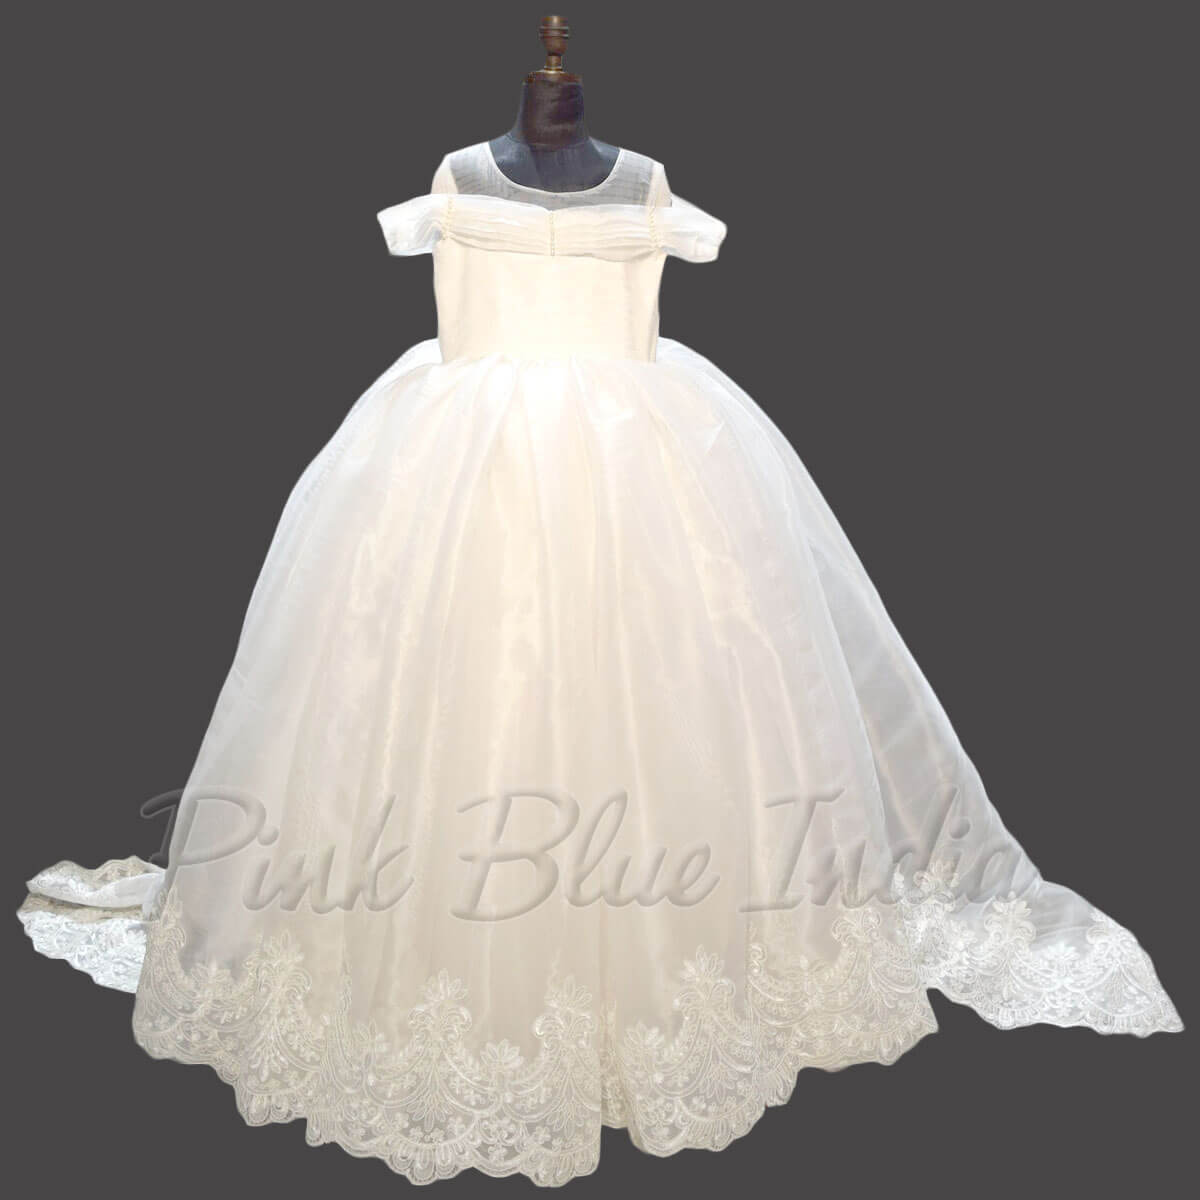 Baptism Dress Baby Girl, Baby Christening Gown